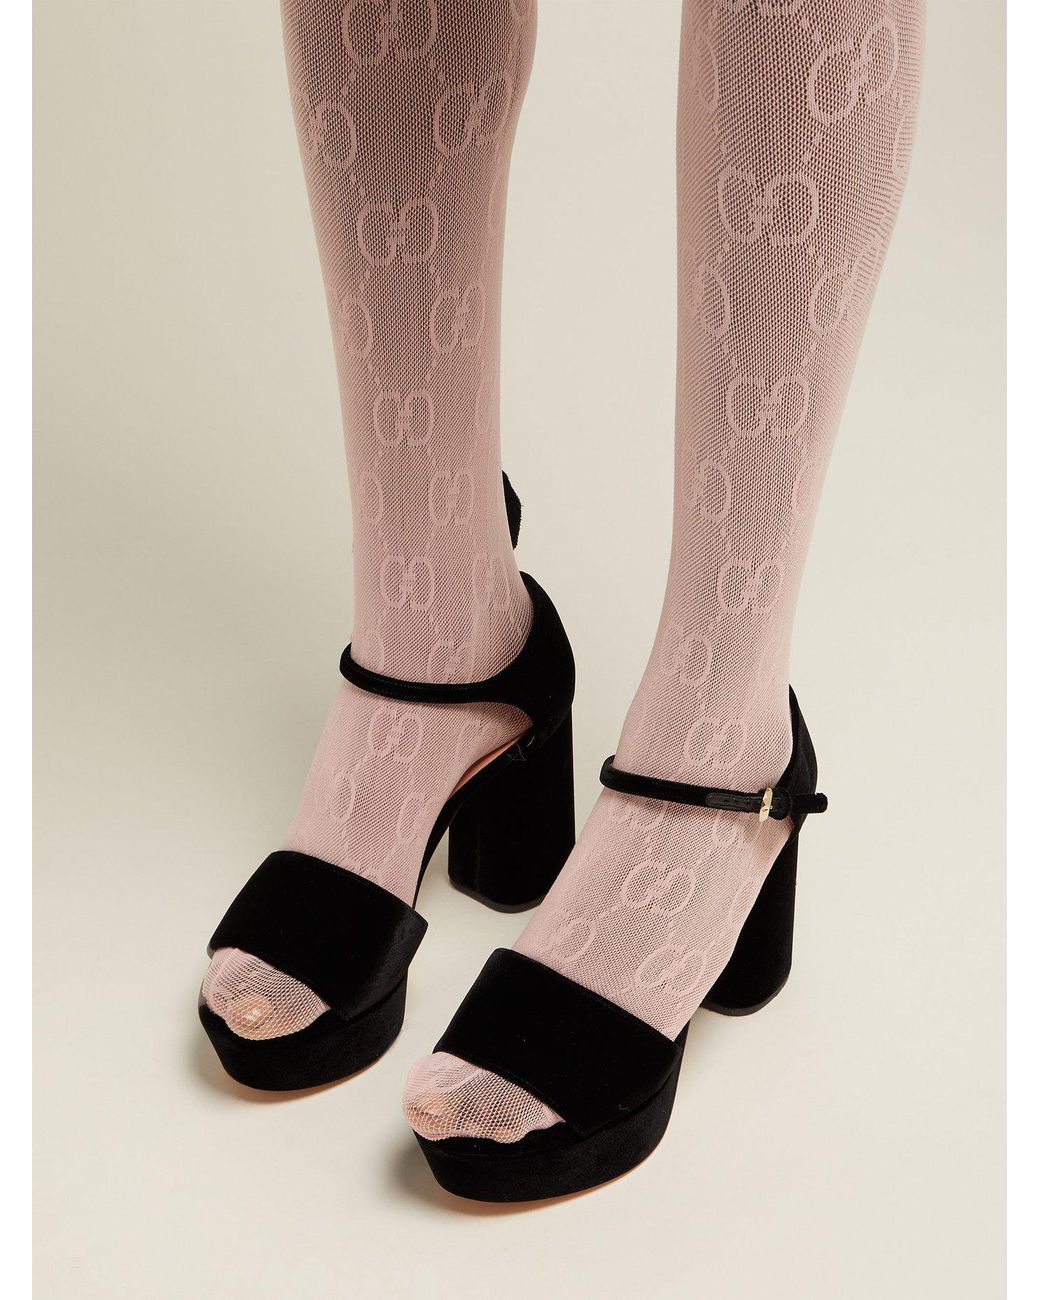 Gucci Gg Tights in Pink